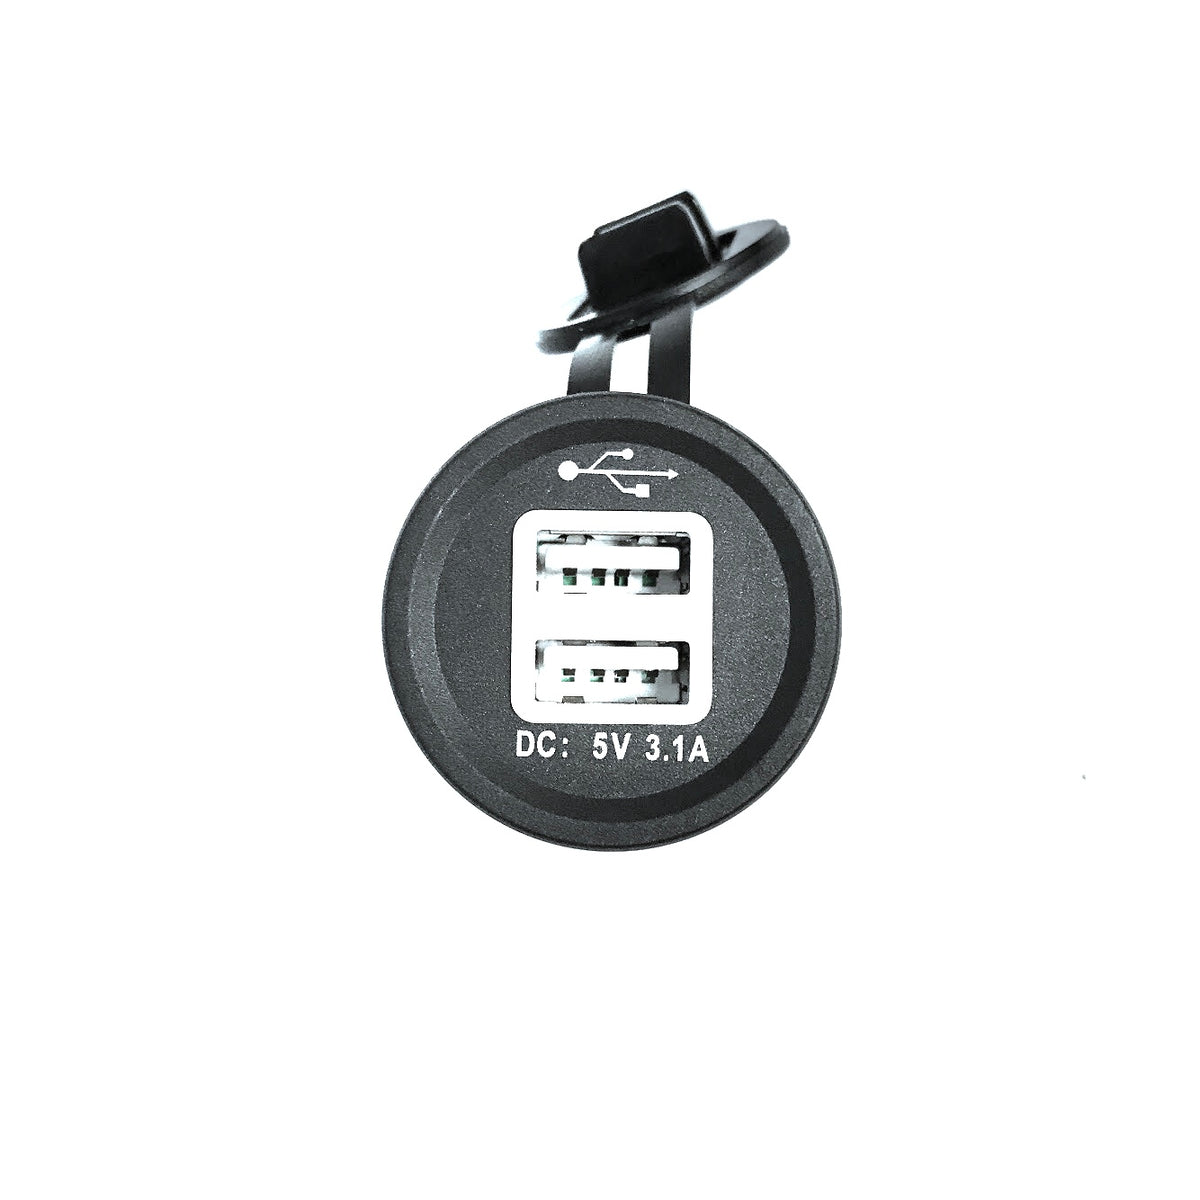 EMC DUAL USB OUTLET, SUITS ALL MODELS OF LOW SPEED VEHICLE